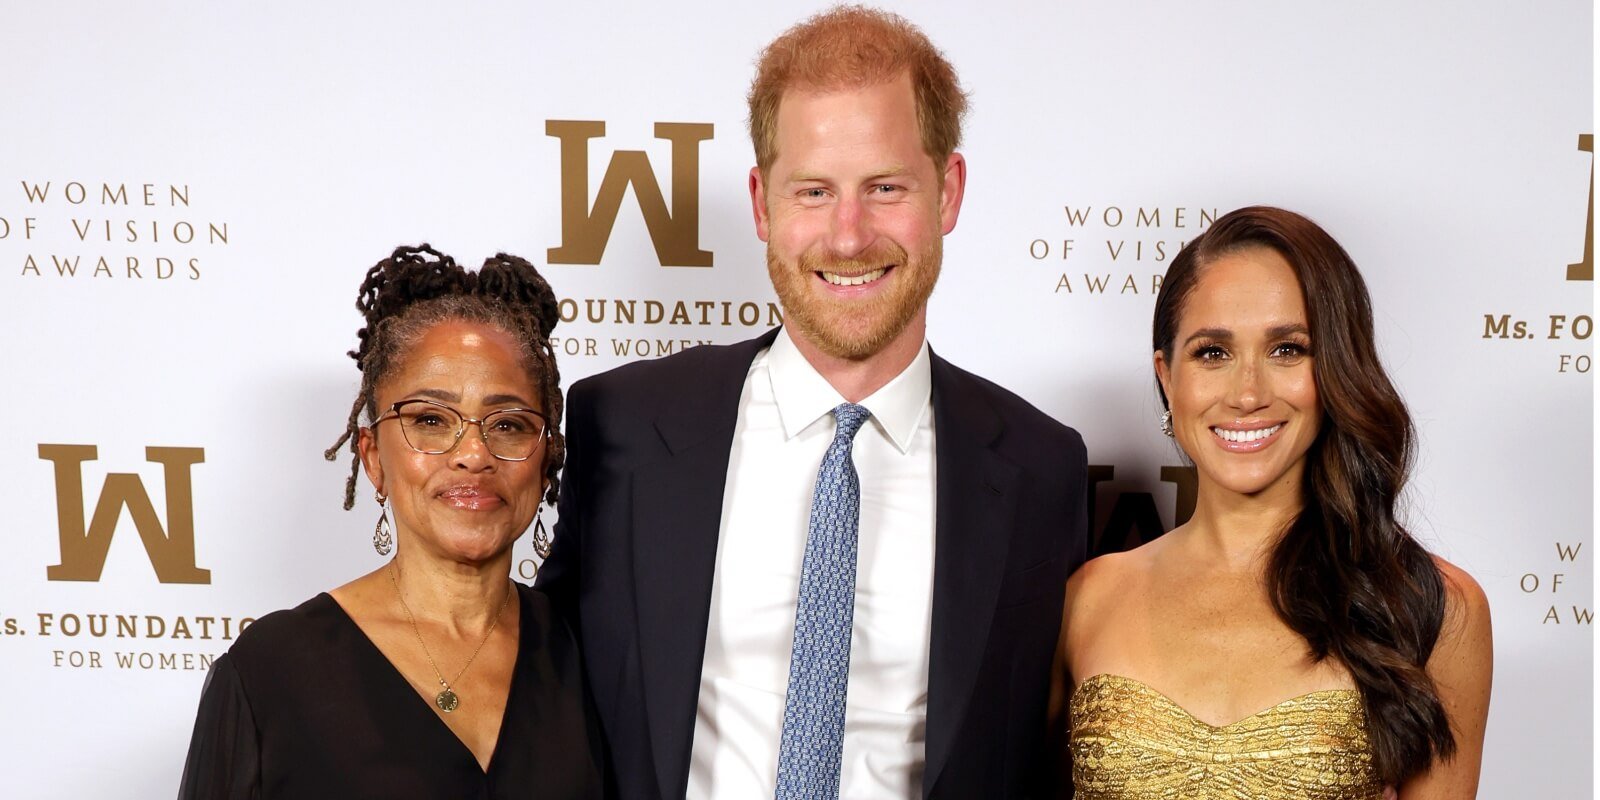 Doria Ragland, Prince Harry, and Meghan Markle pose together at the Women of Vision awards in May 2023.